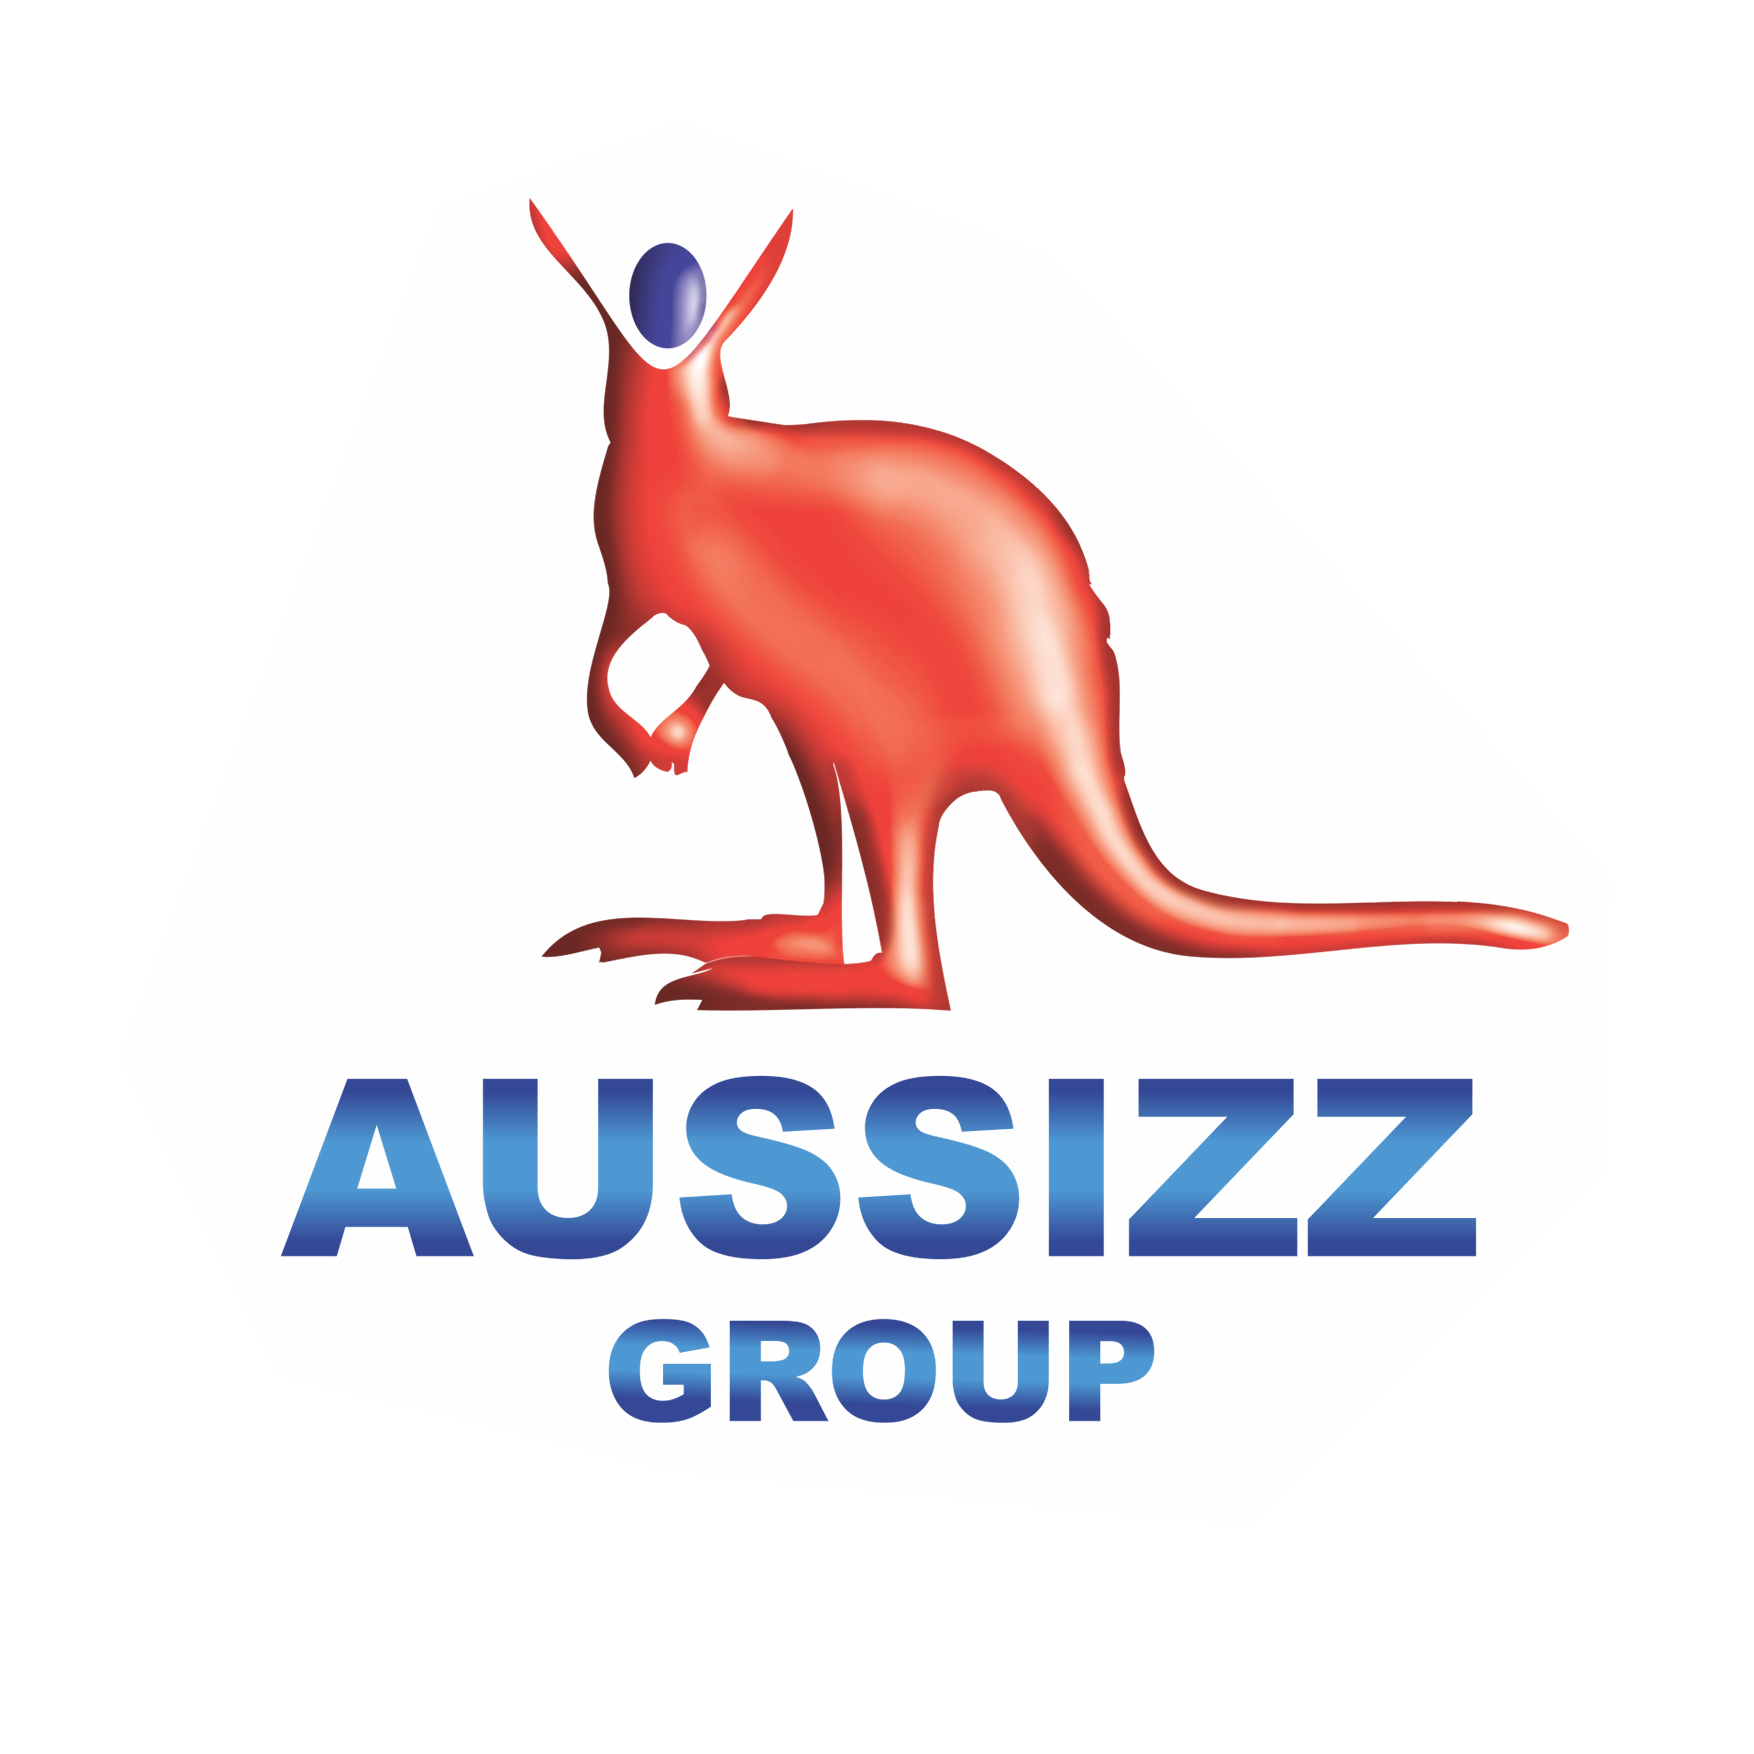 Aussizz Migration and Education Consultants - Canningvale